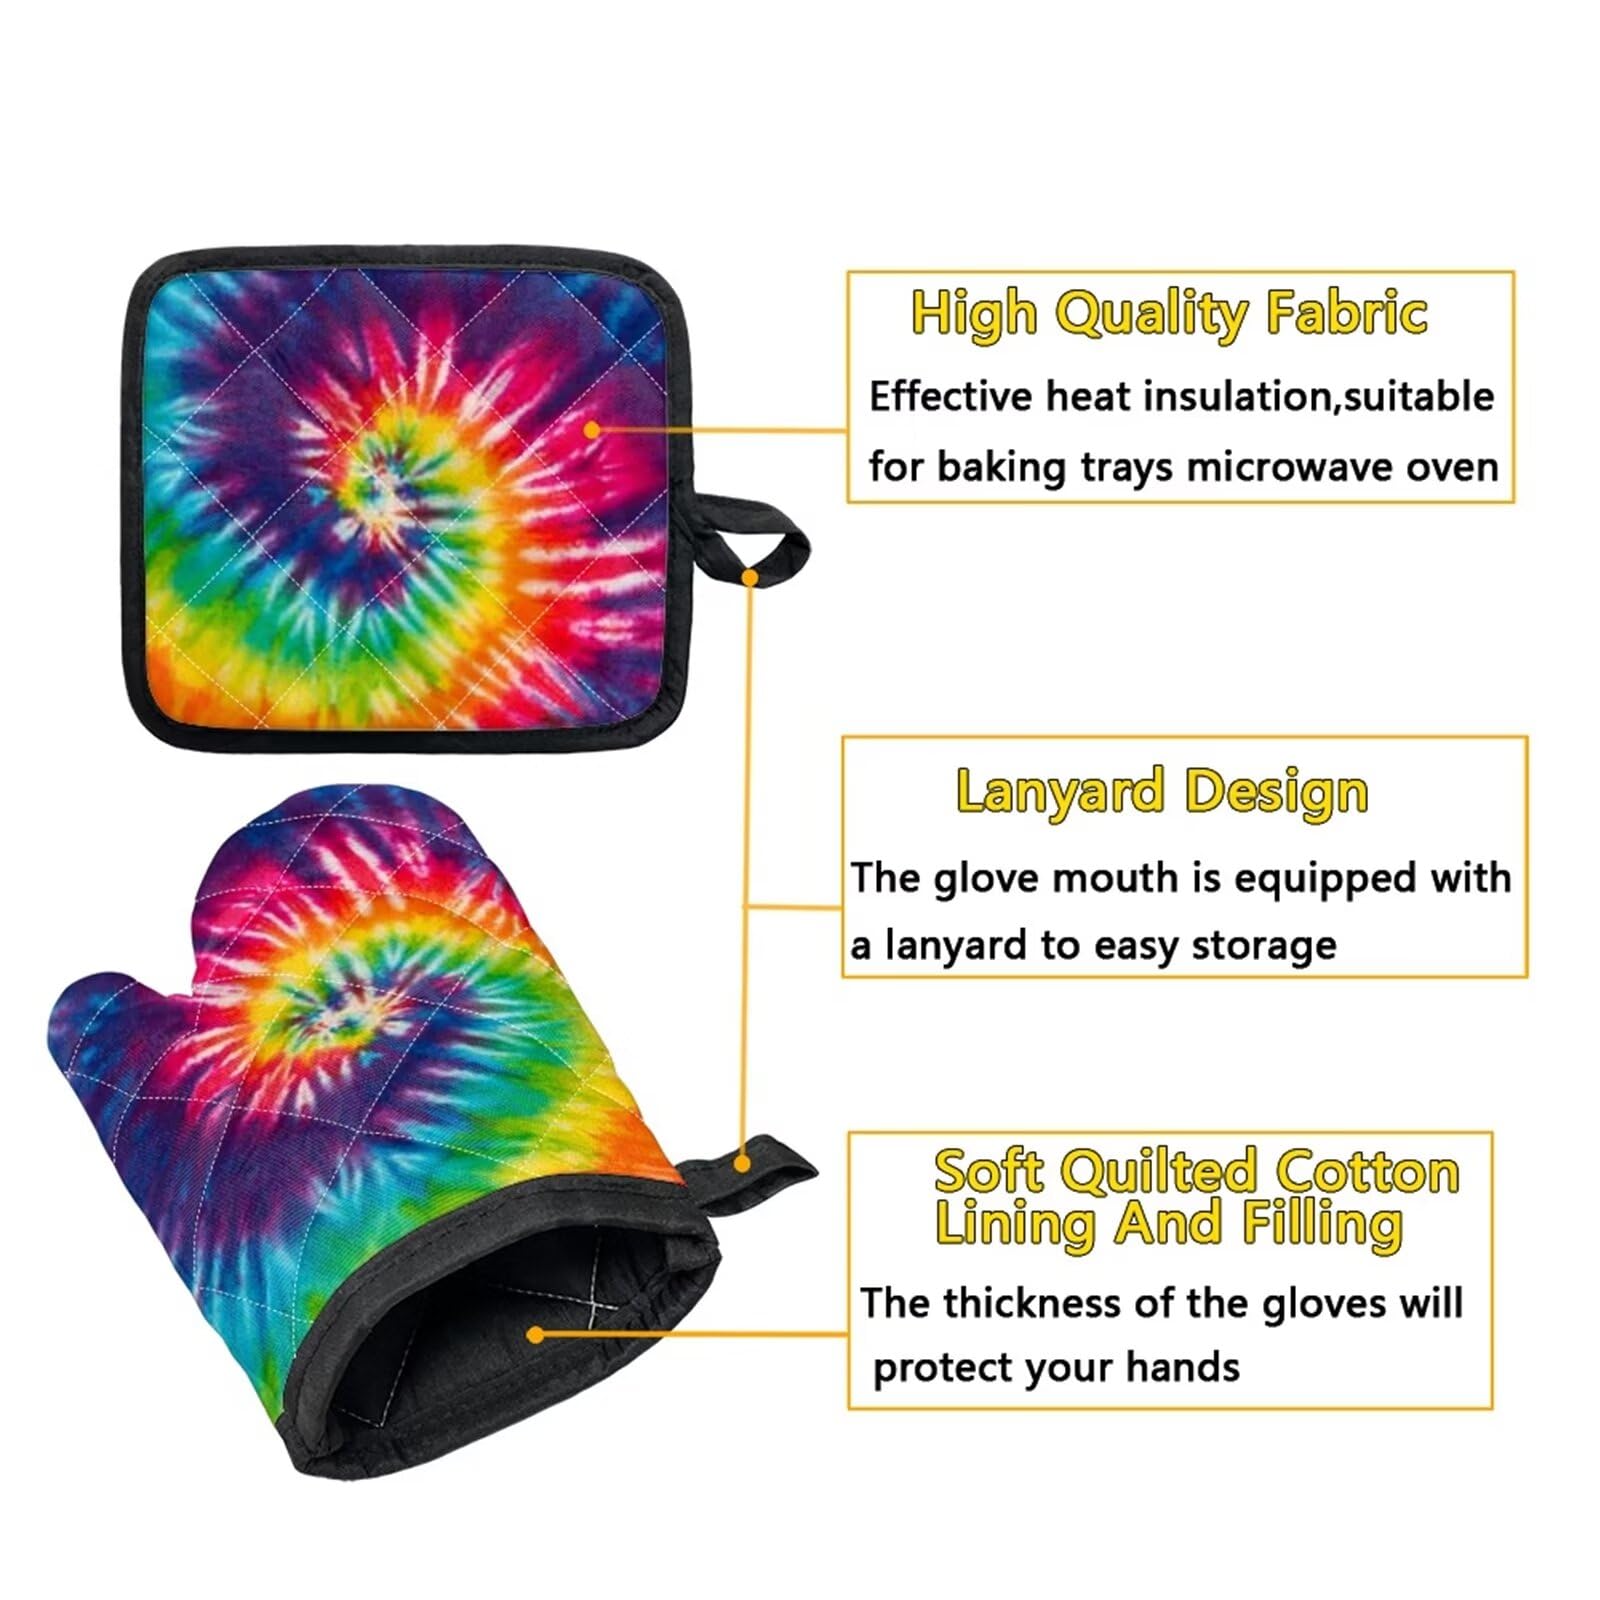 BIGCARJOB Set of 2 Pack Kitchen Oven Gloves Pot Pads with Rainbow Tie Dye Printed Oven Mit Set Womens Girls BBQ Gloves Pot Mats Potholders for Kitchen Baking Cooking